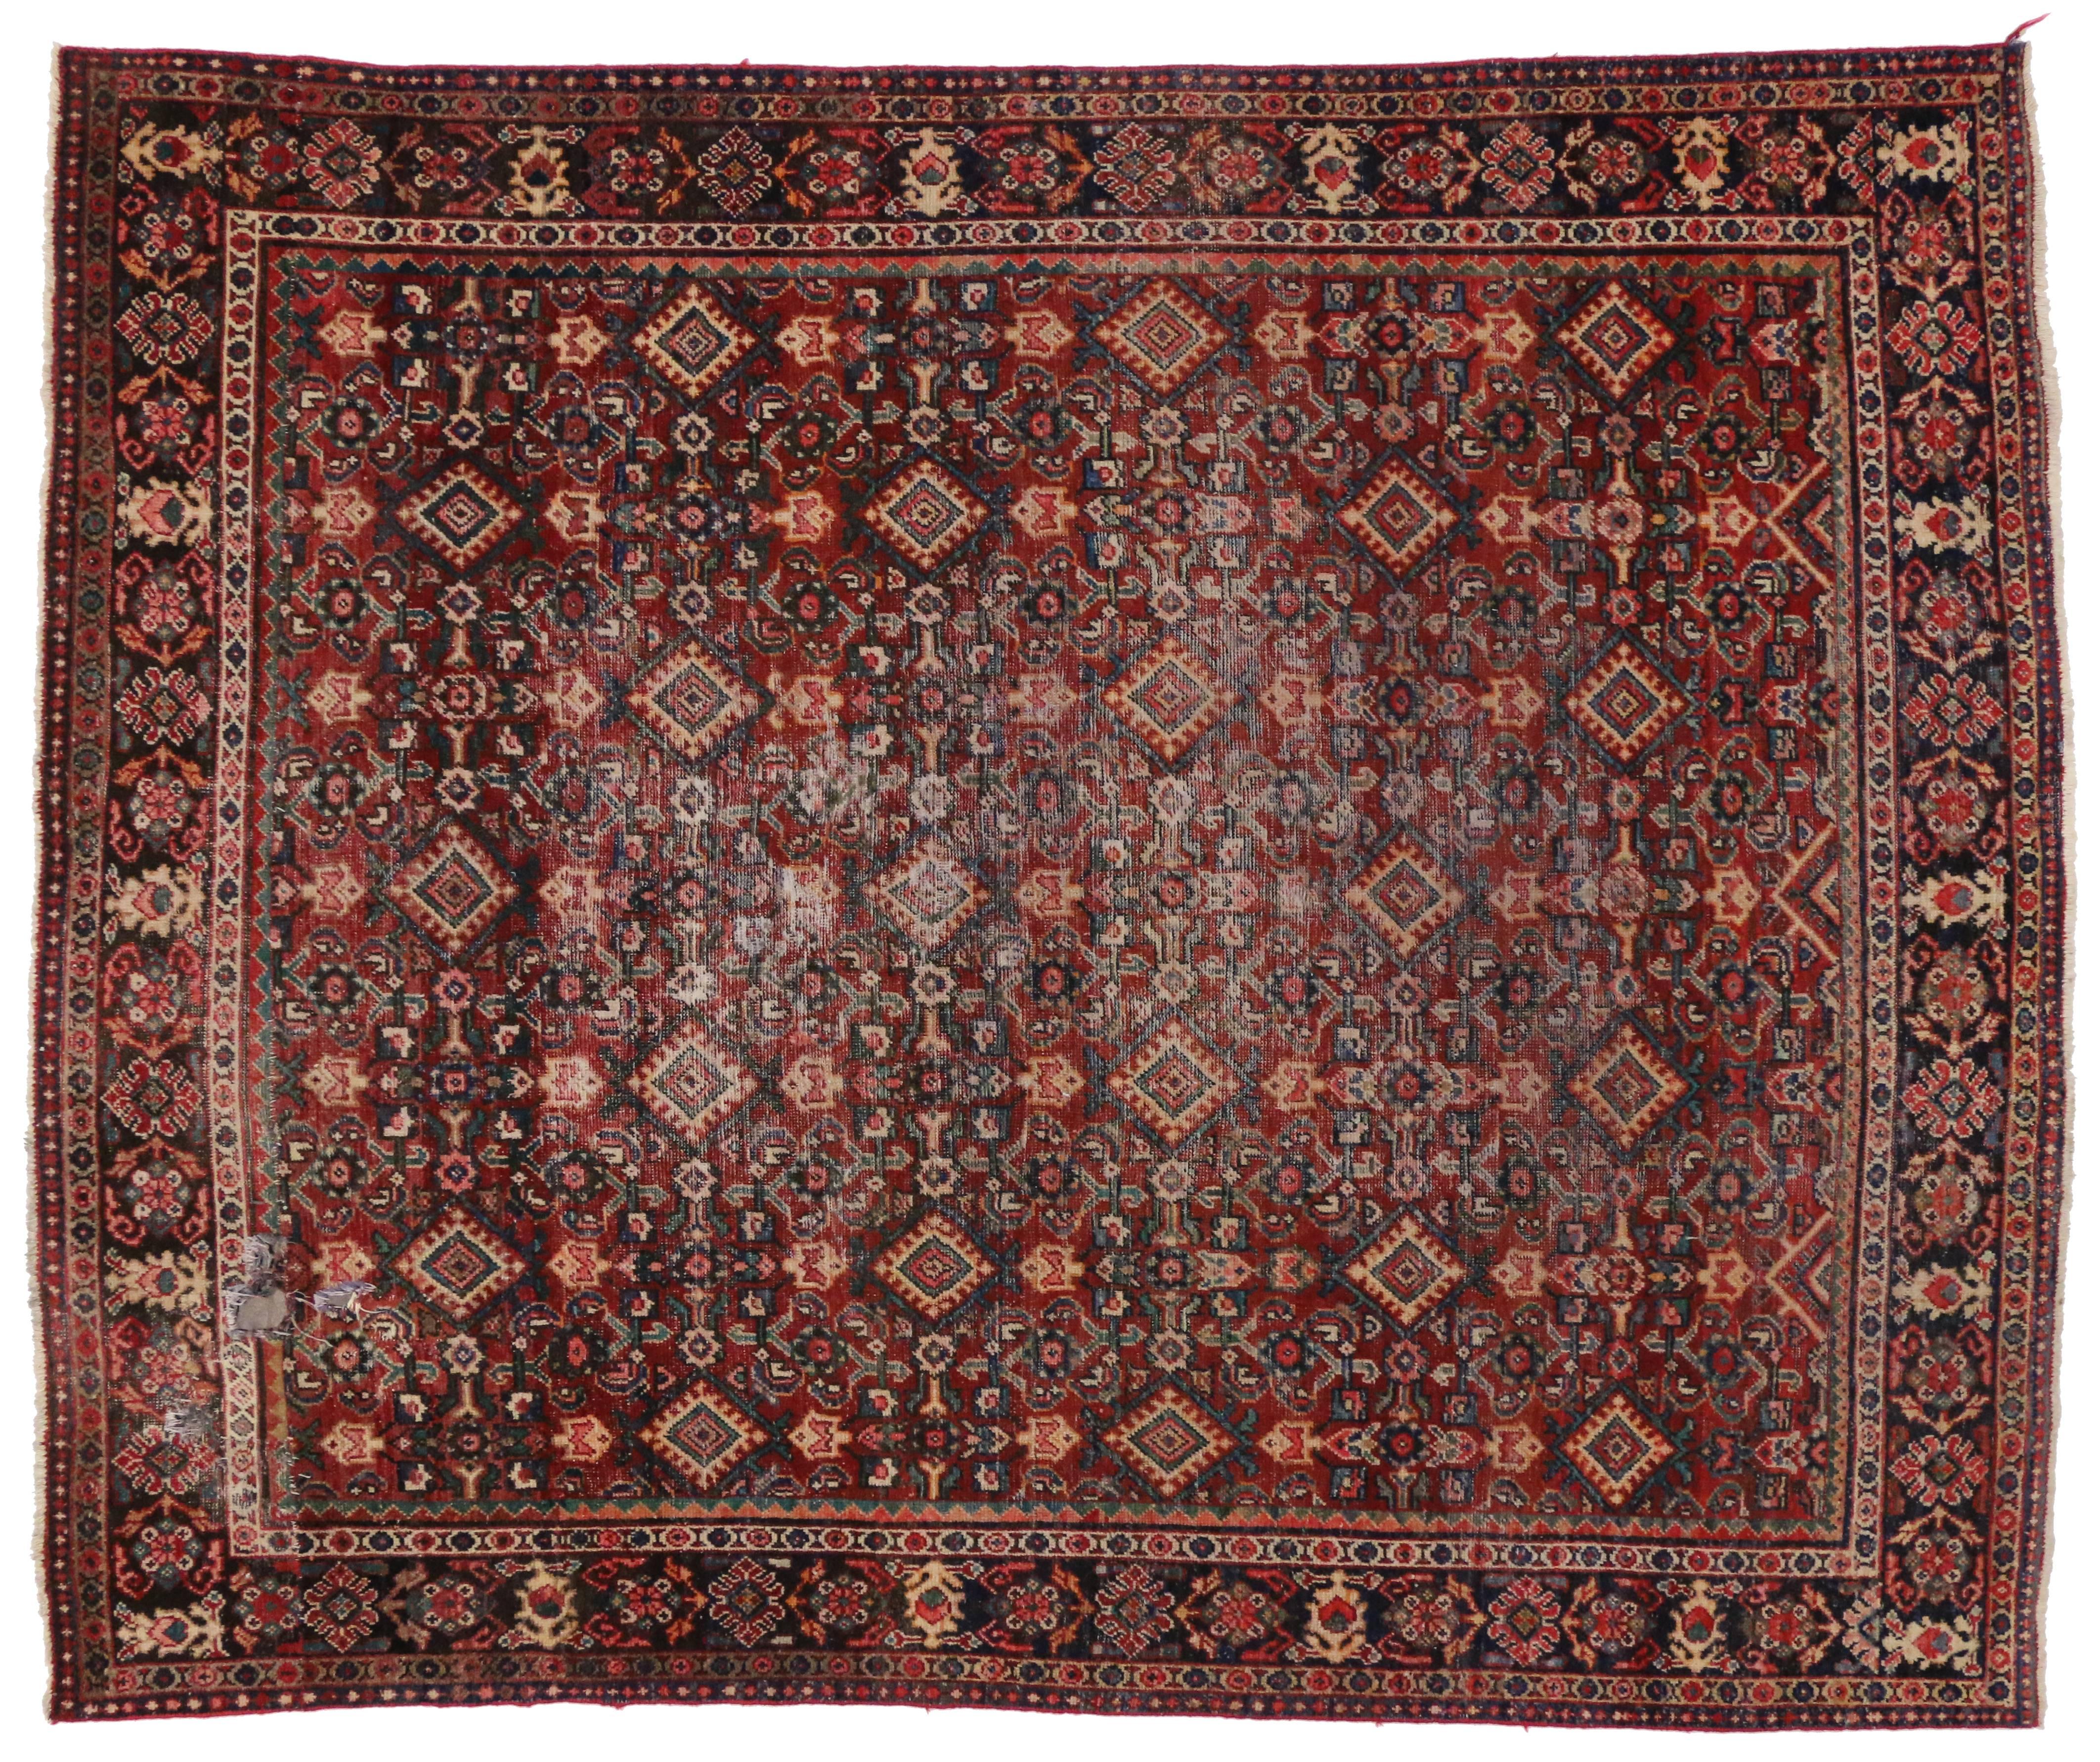 Distressed Antique Persian Mahal Rug with Modern Rustic English Manor Style For Sale 3